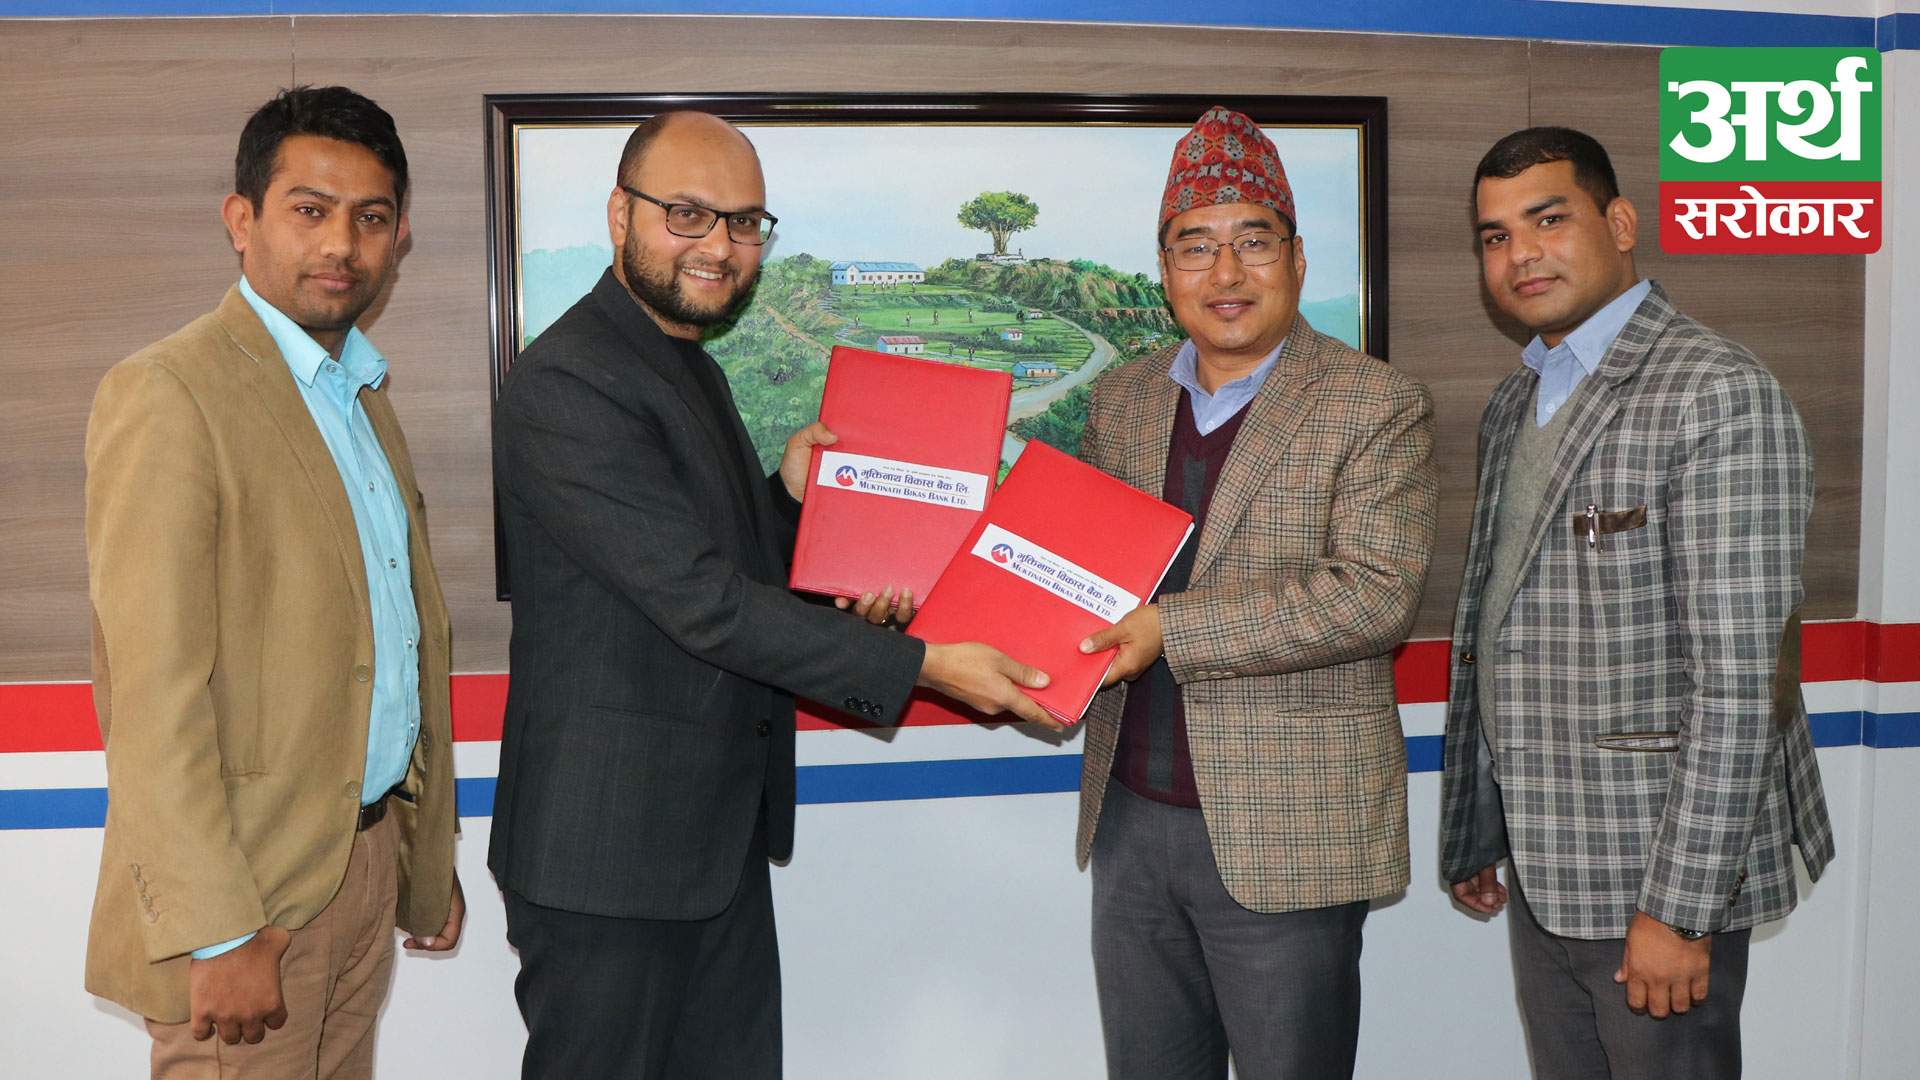 Muktinath Bikas Bank tied up agreement with ‘We Chat Pay’